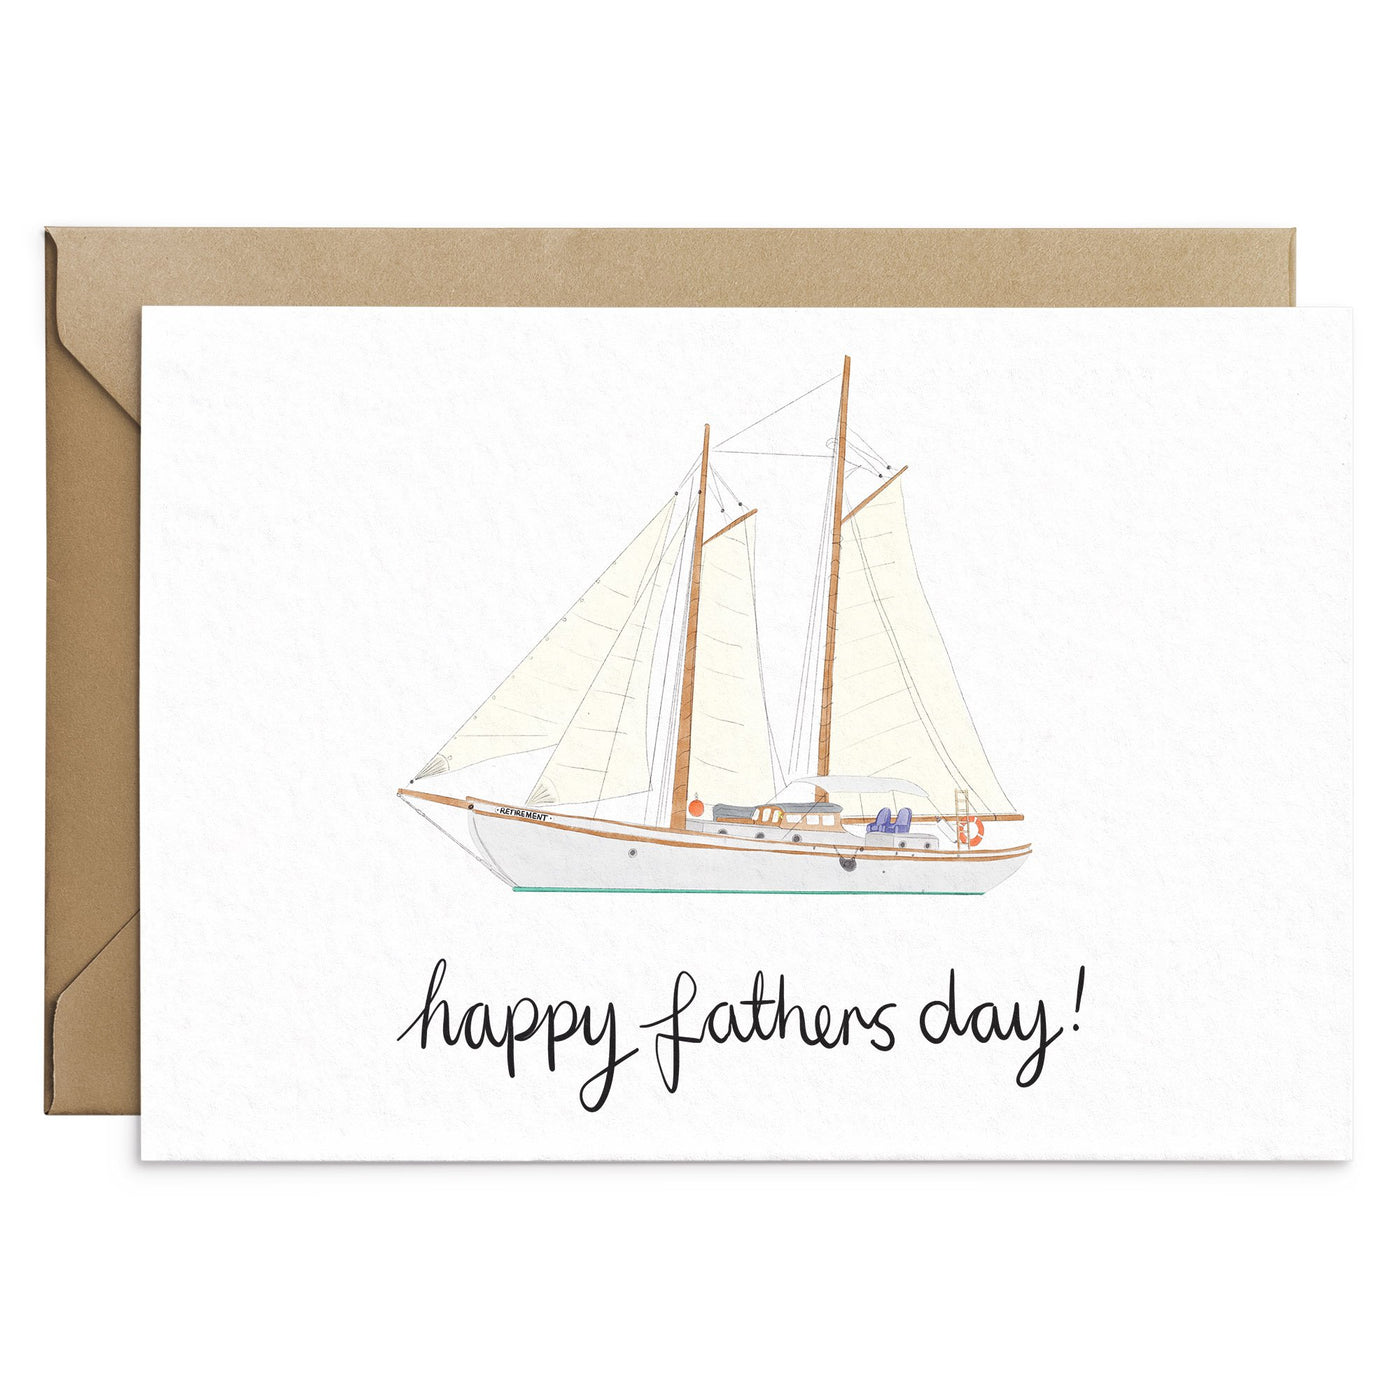 Fathers Day Illustrated Boat & Yacht Card - Poppins & Co.